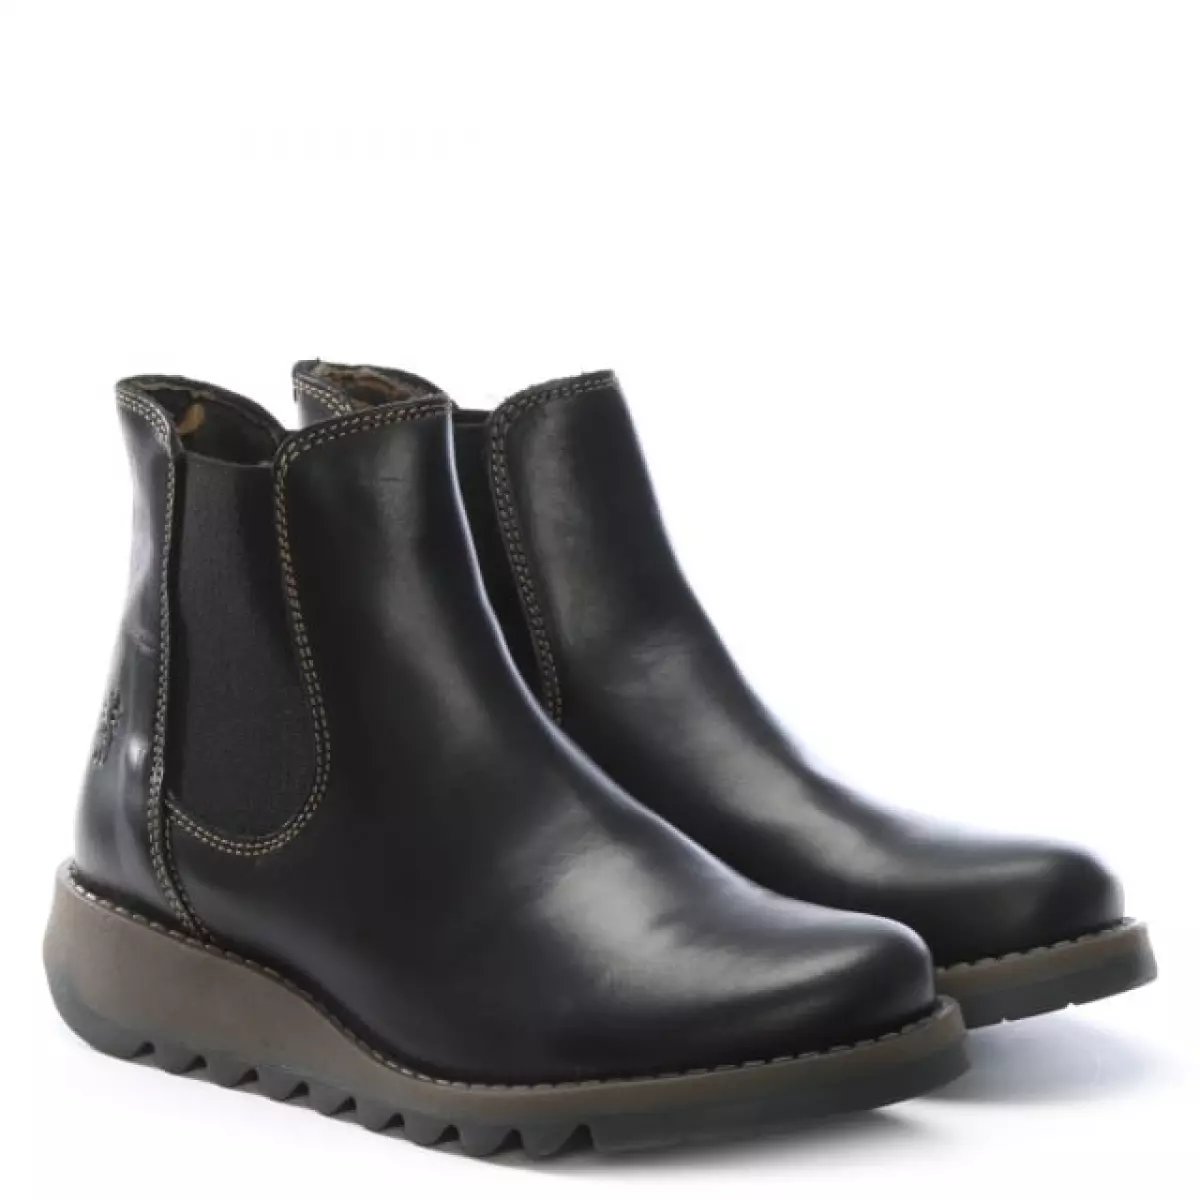 Fly London Salv Black Leather Wedge Chelsea Boots